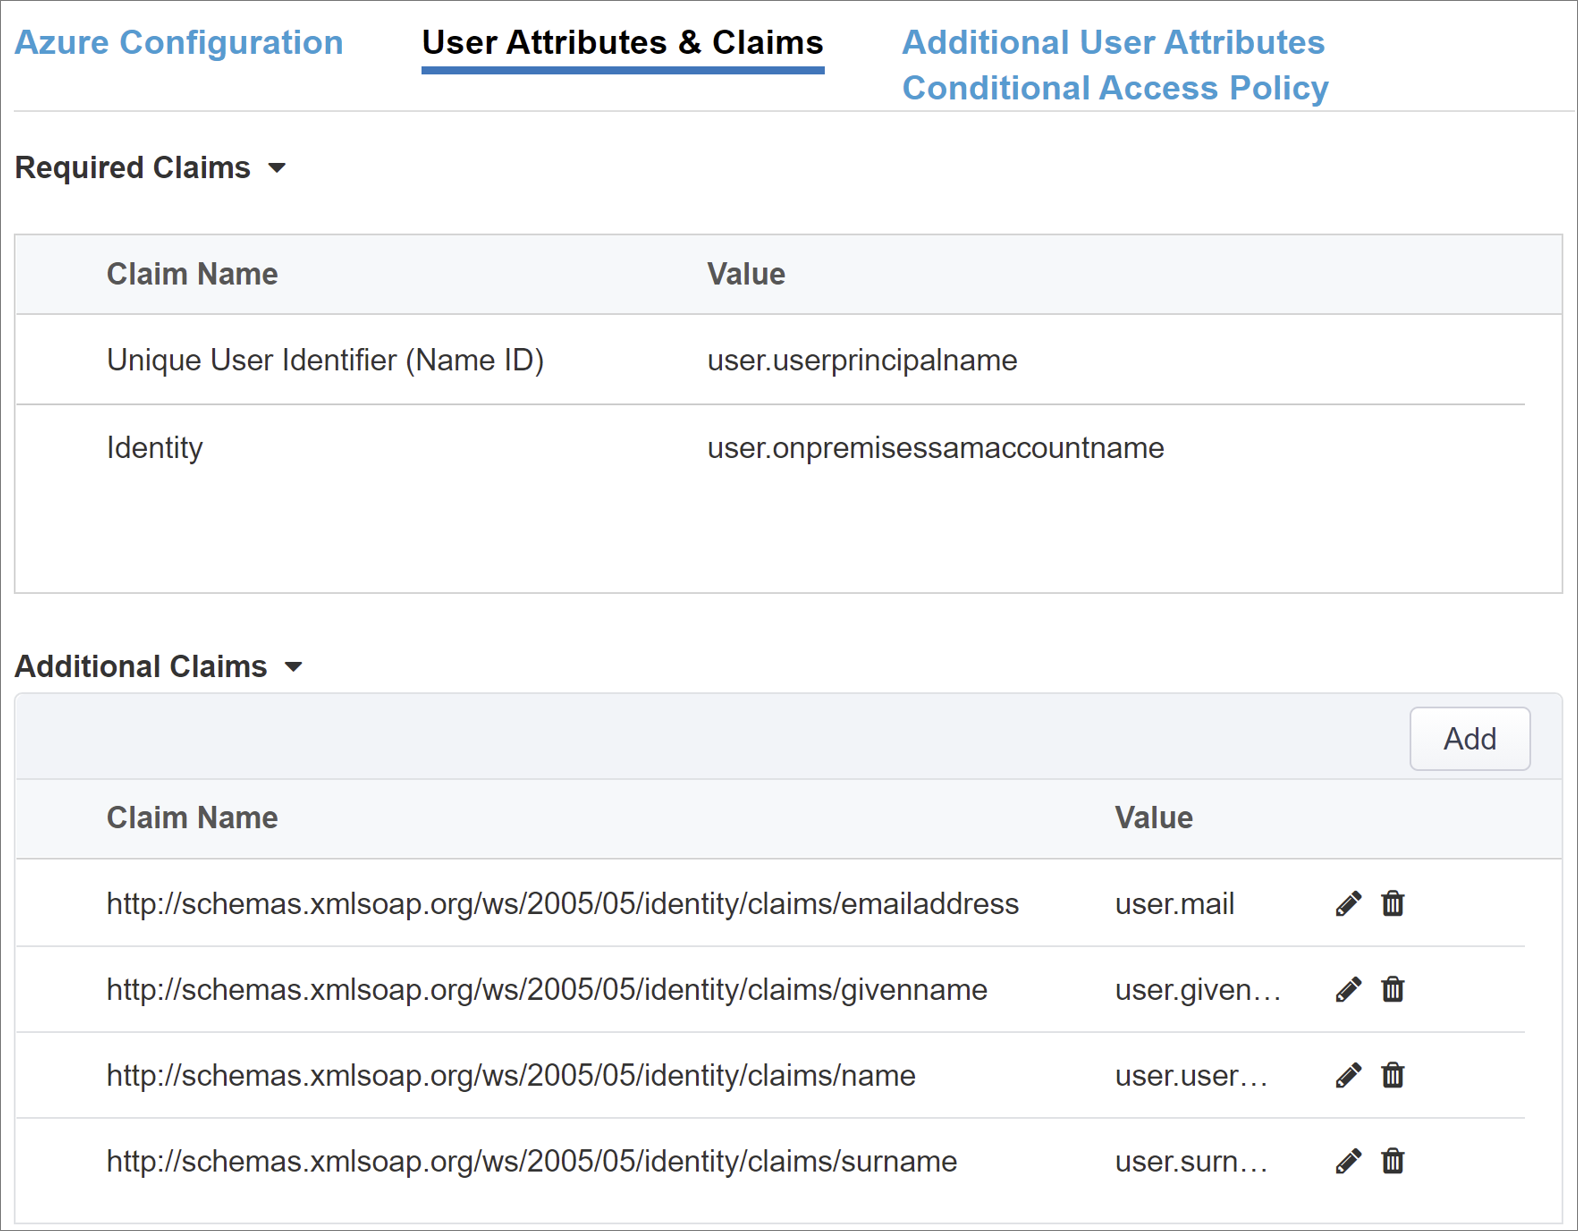 Screenshot of options and selections for User Attributes & Claims.